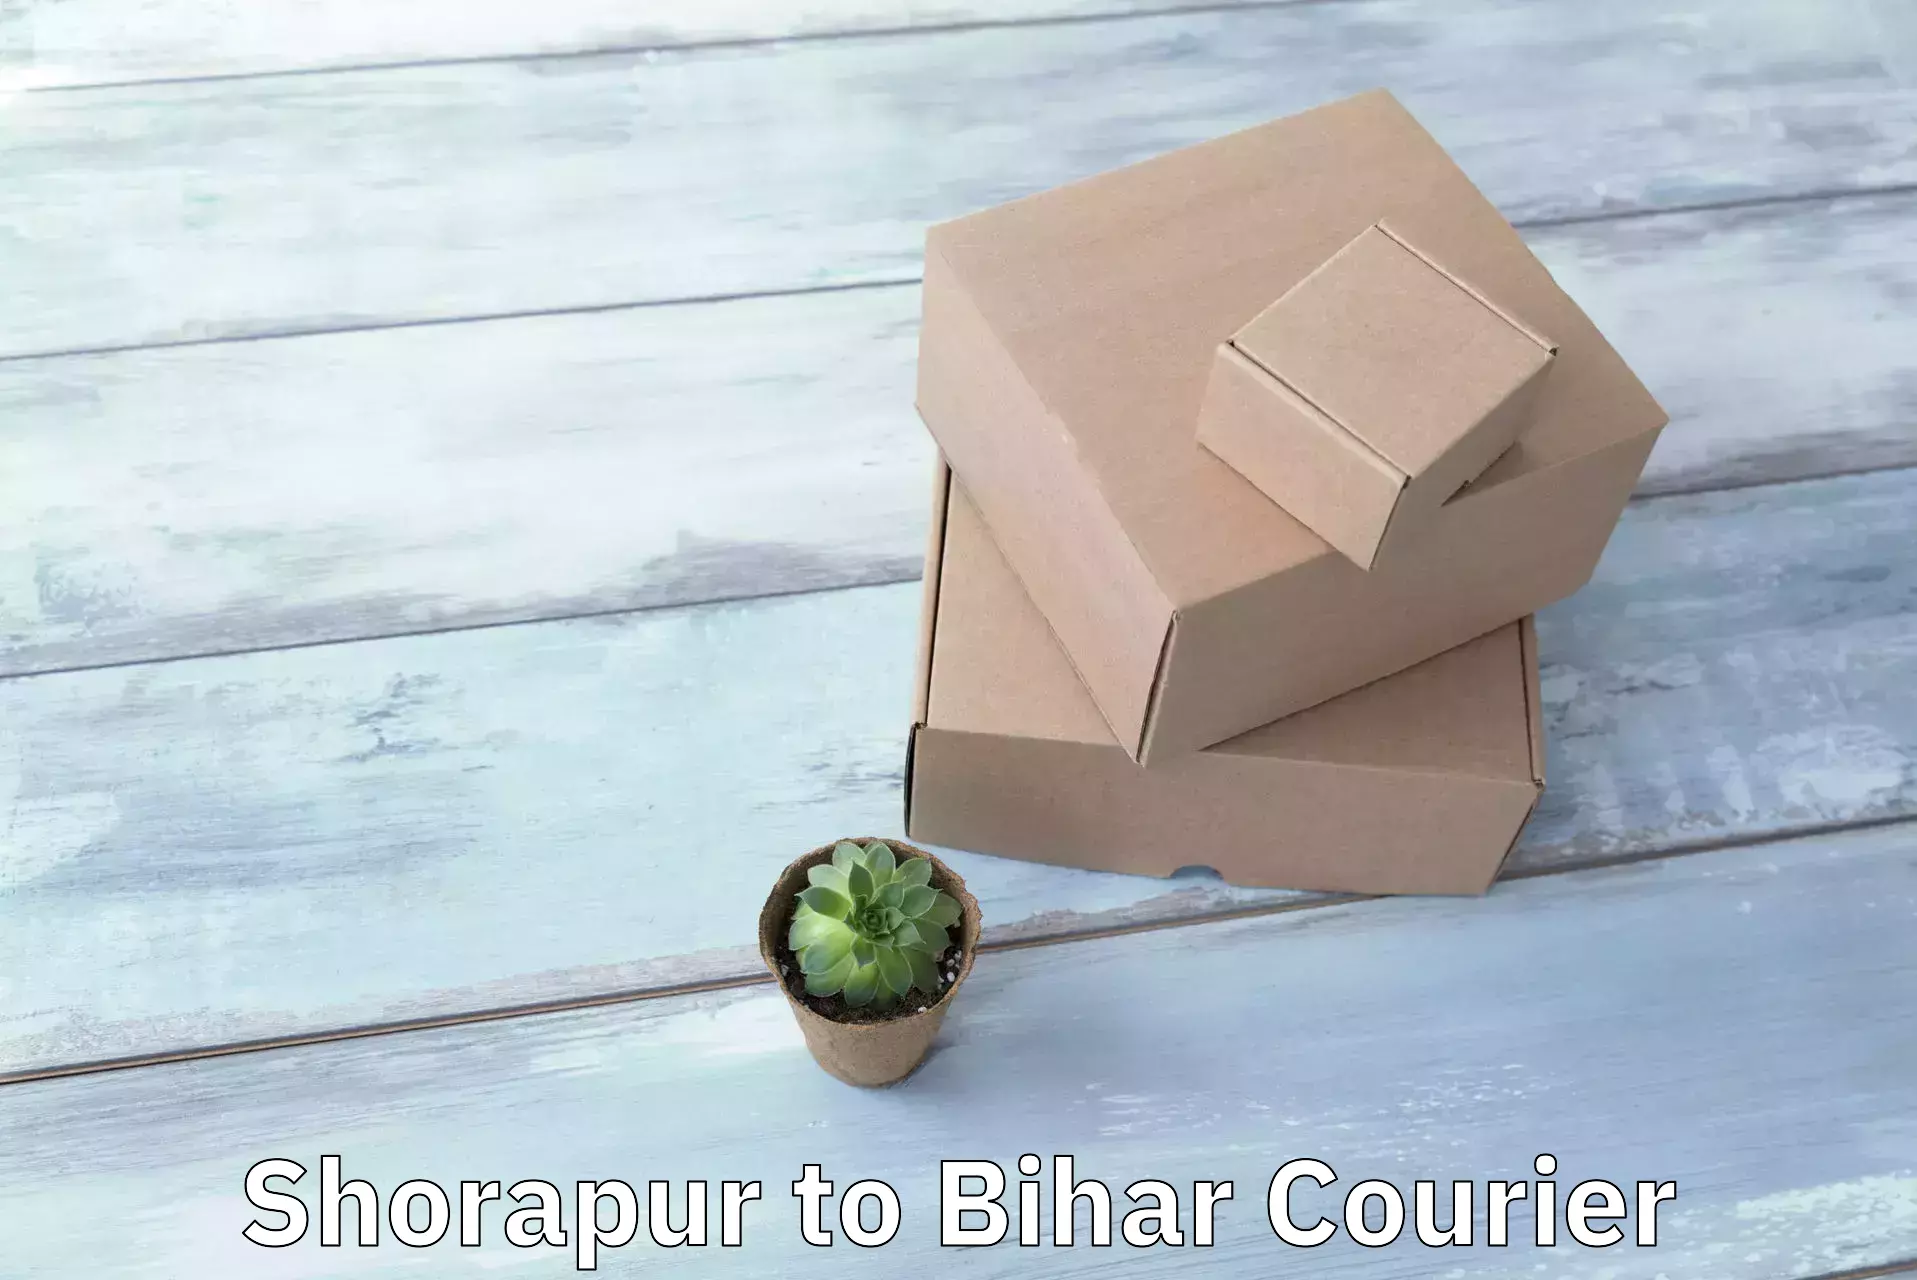 Next-day delivery options Shorapur to Fatwah